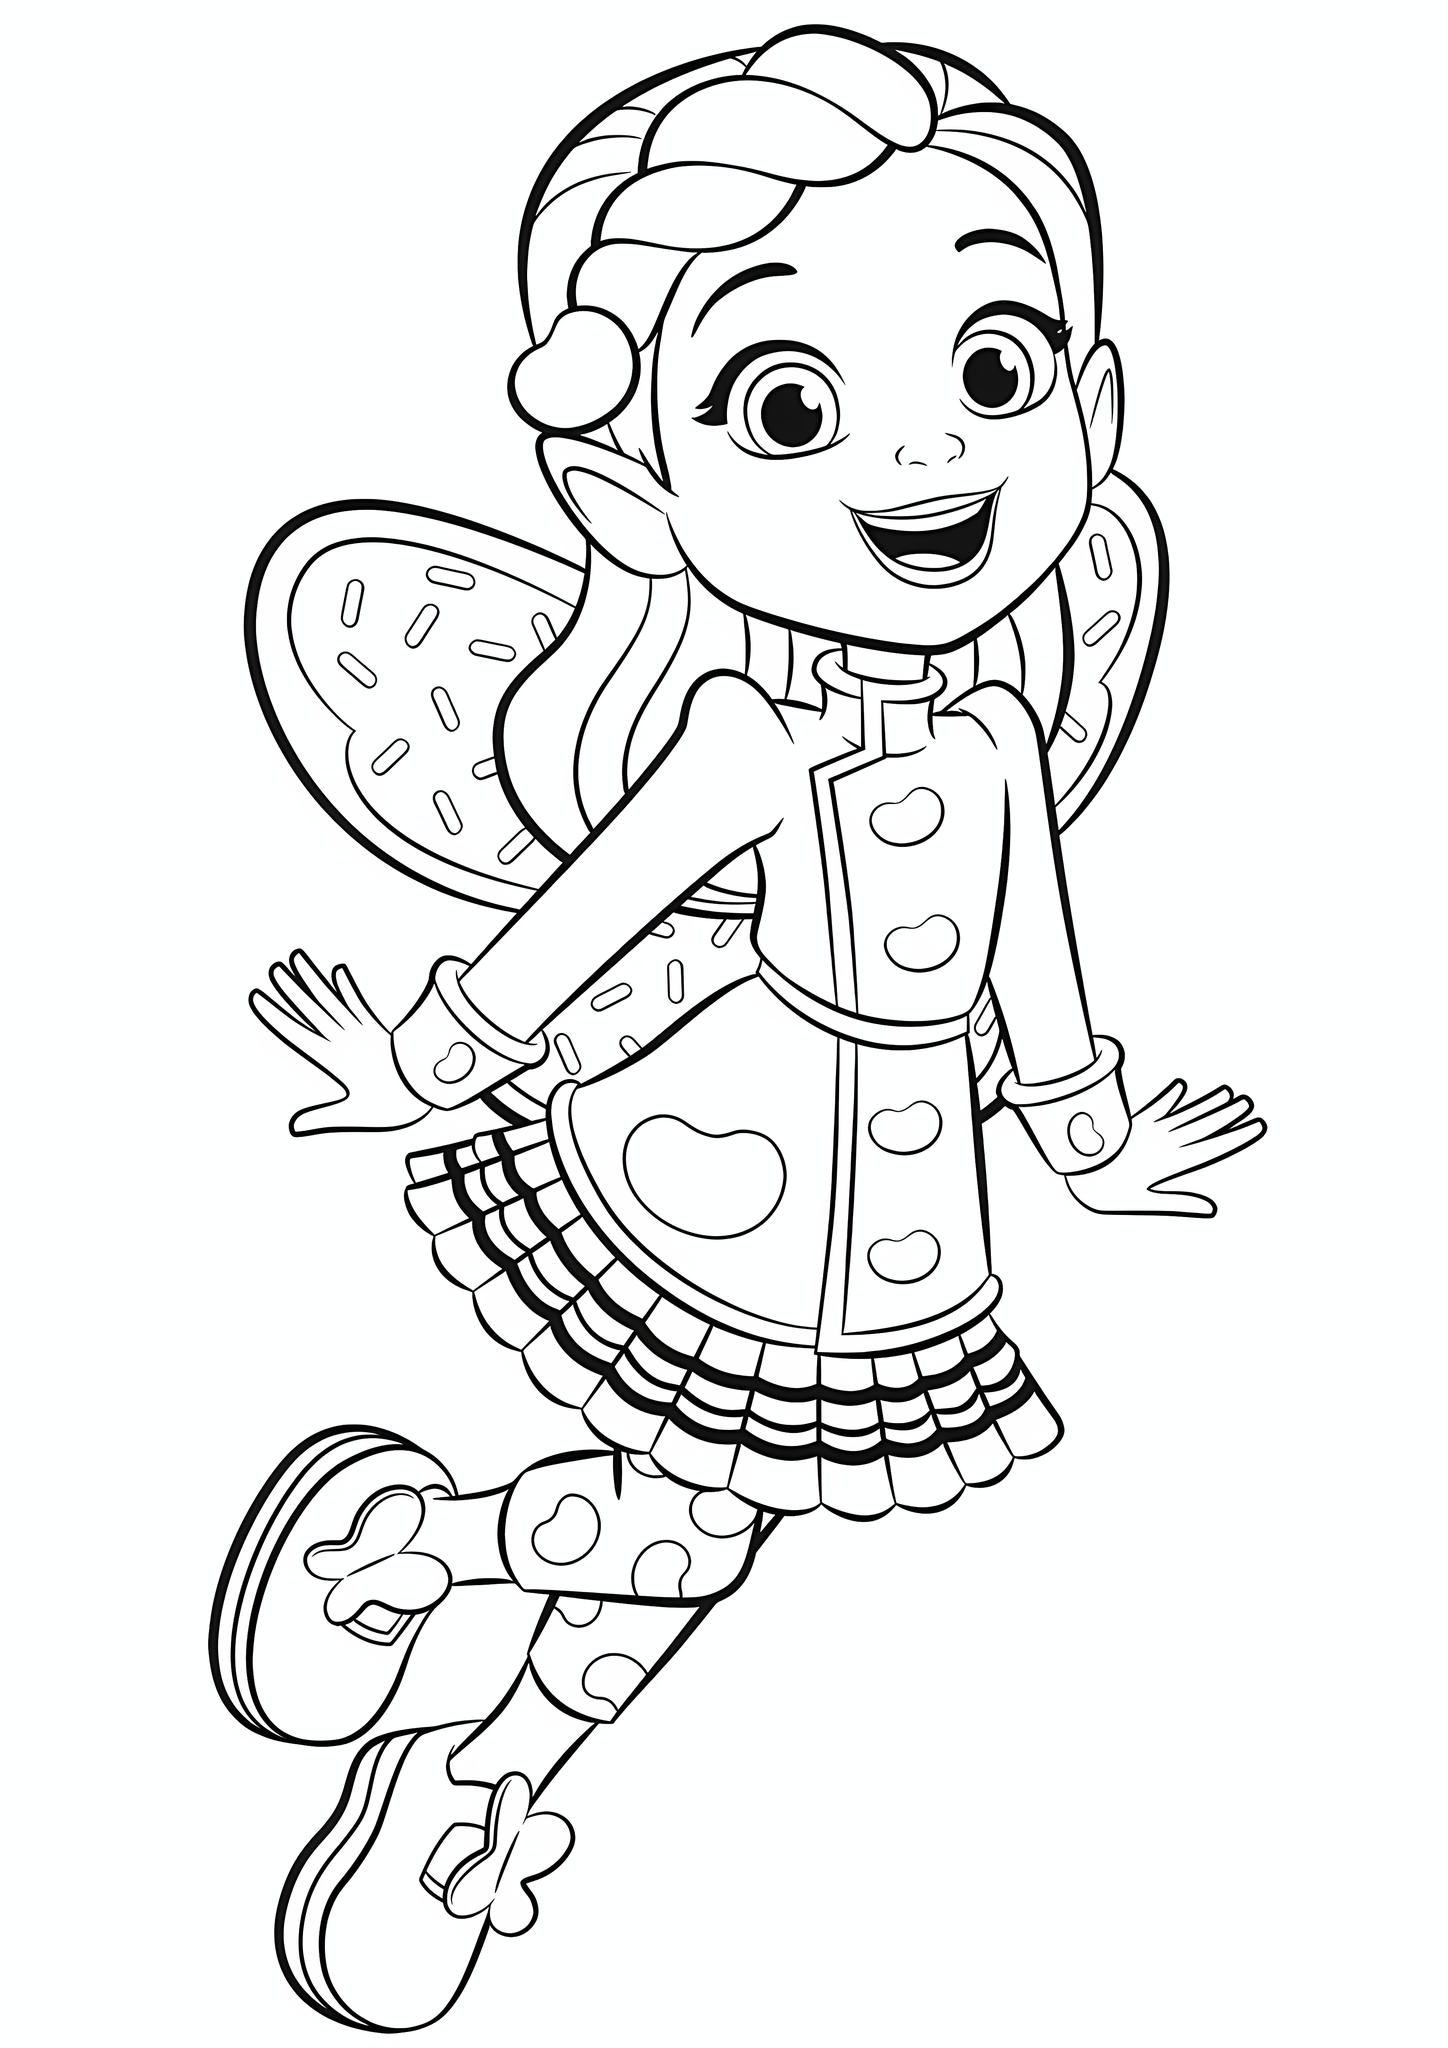 Butterbean's Cafe Coloring Pages | Free print and download